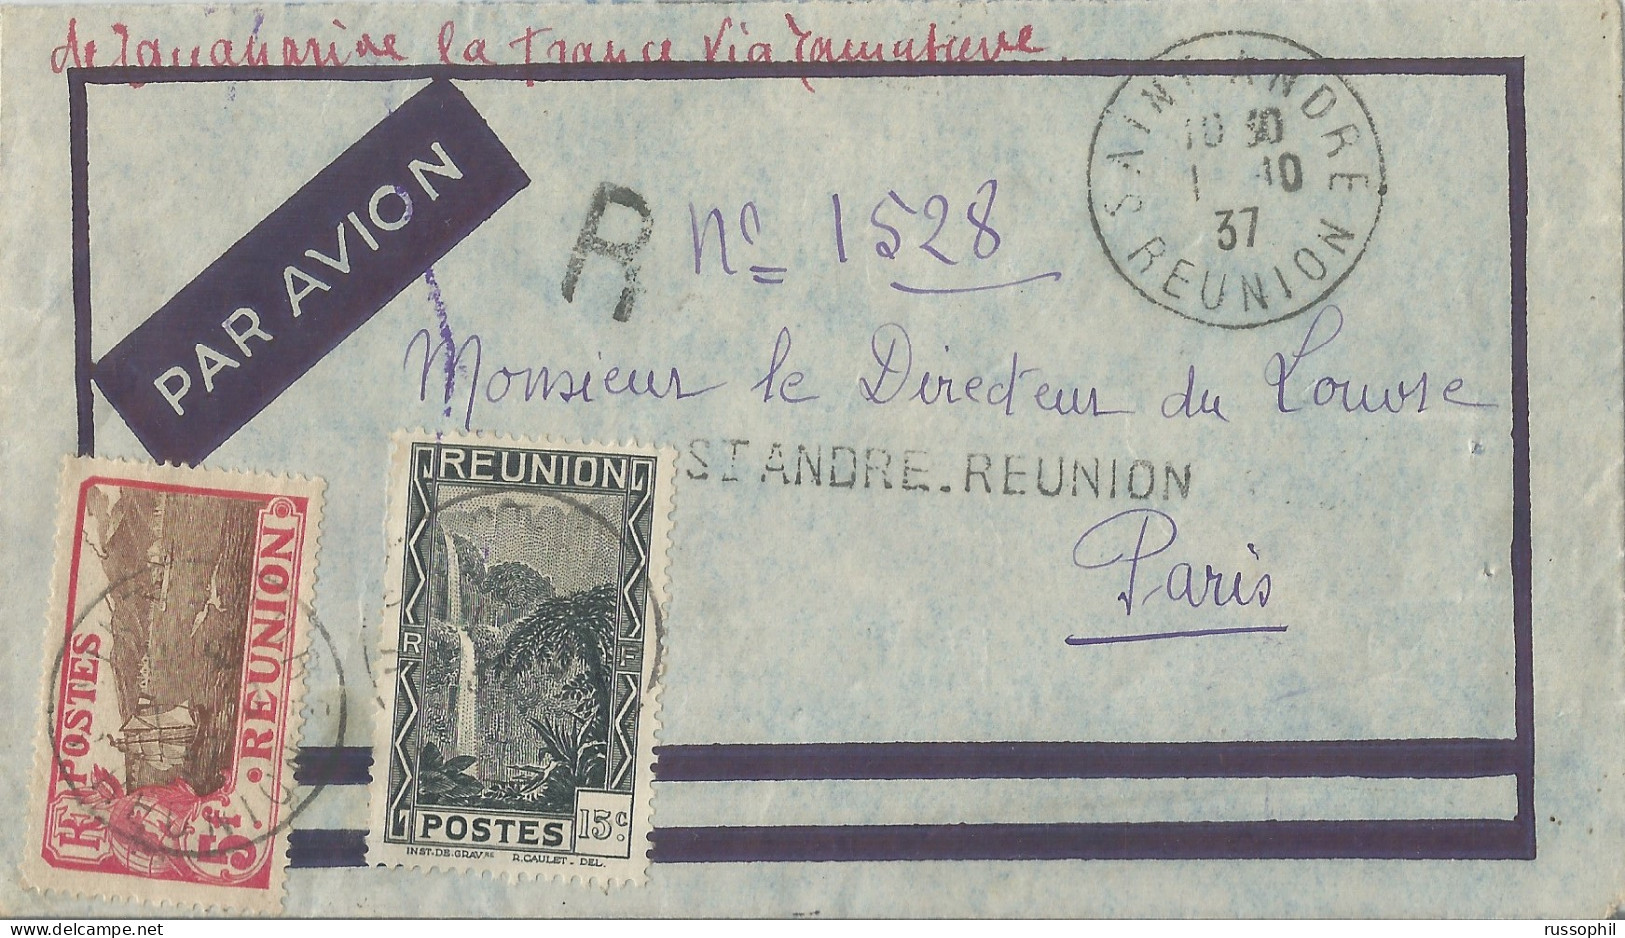 REUNION - 5 FR 15 CENT.  2 STAMP FRANKING ON REGISTERED AIR COVER FROM SAINT ANDRE TO MAINLAND FRANCE - 1937 - Cartas & Documentos